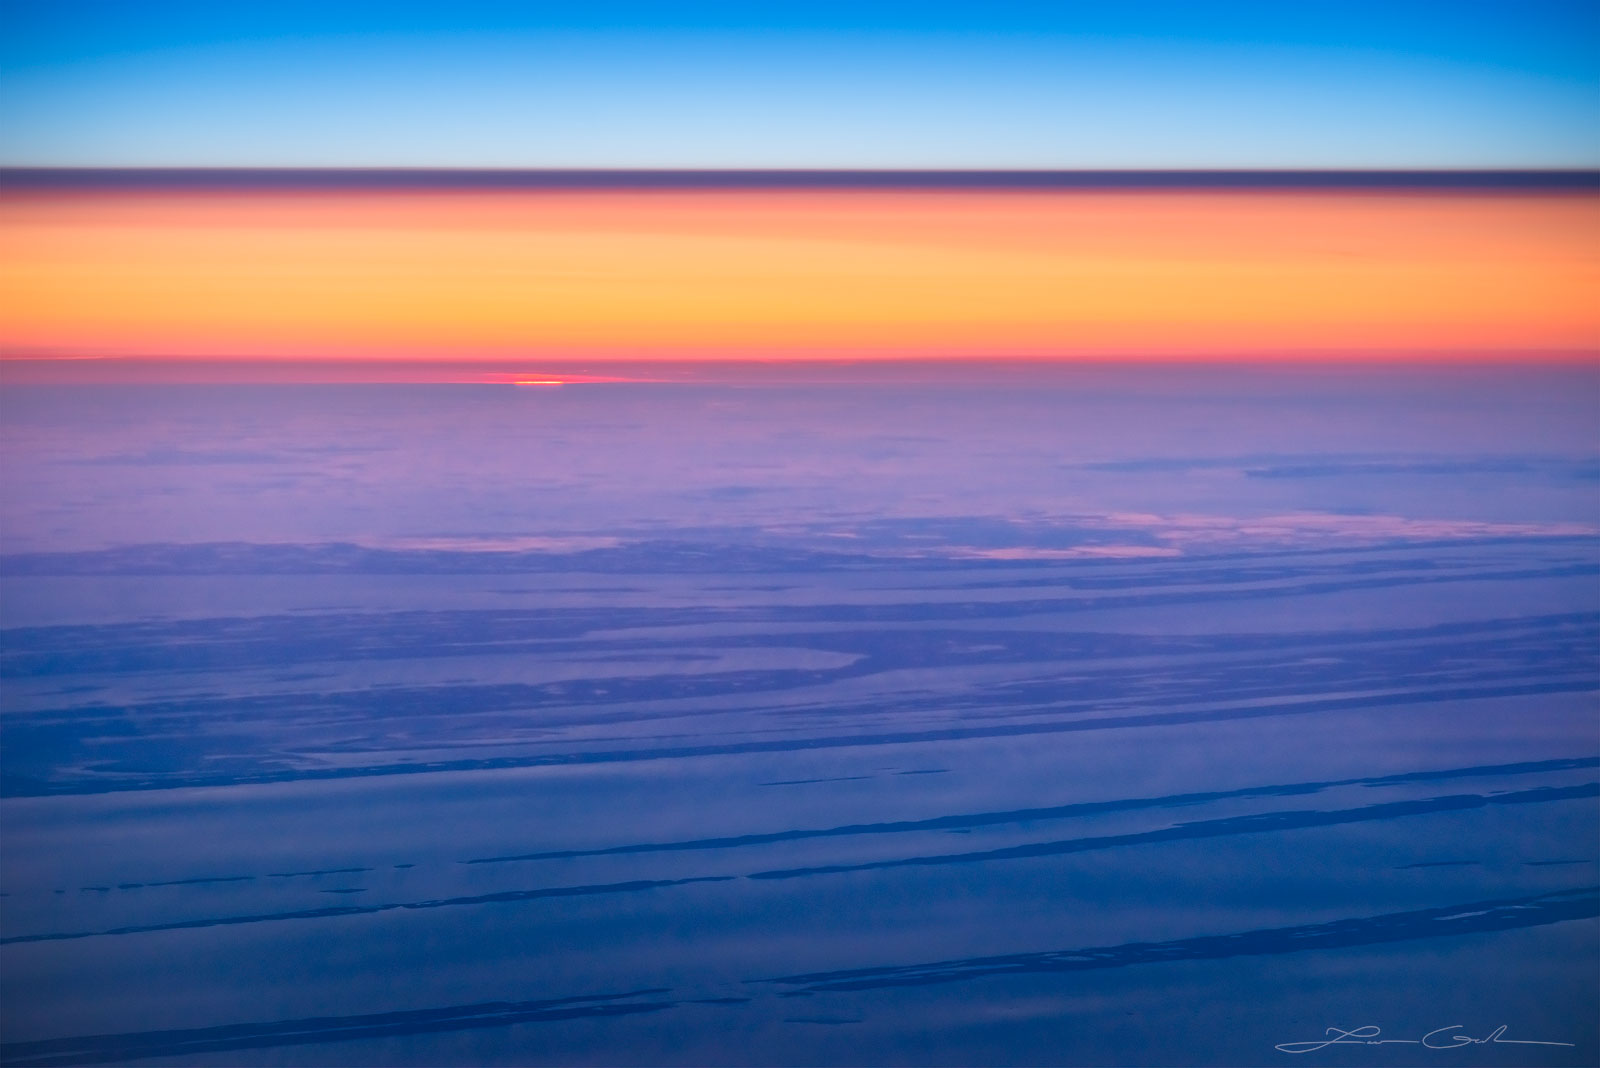 An aerial sunset with blue sky, red light band and land below